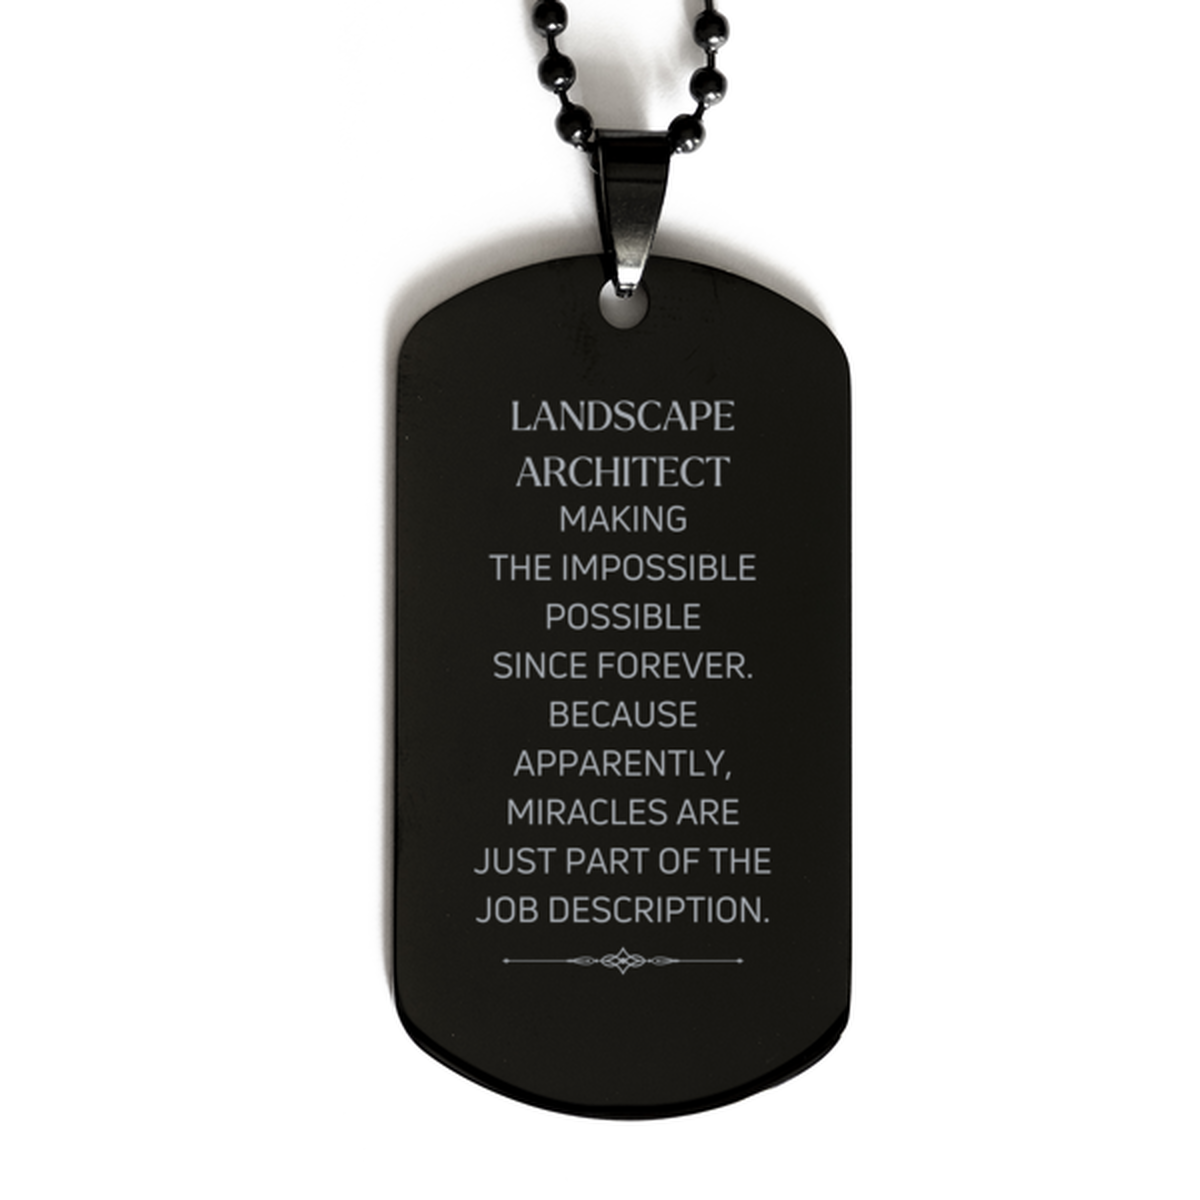 Funny Landscape Architect Gifts, Miracles are just part of the job description, Inspirational Birthday Black Dog Tag For Landscape Architect, Men, Women, Coworkers, Friends, Boss